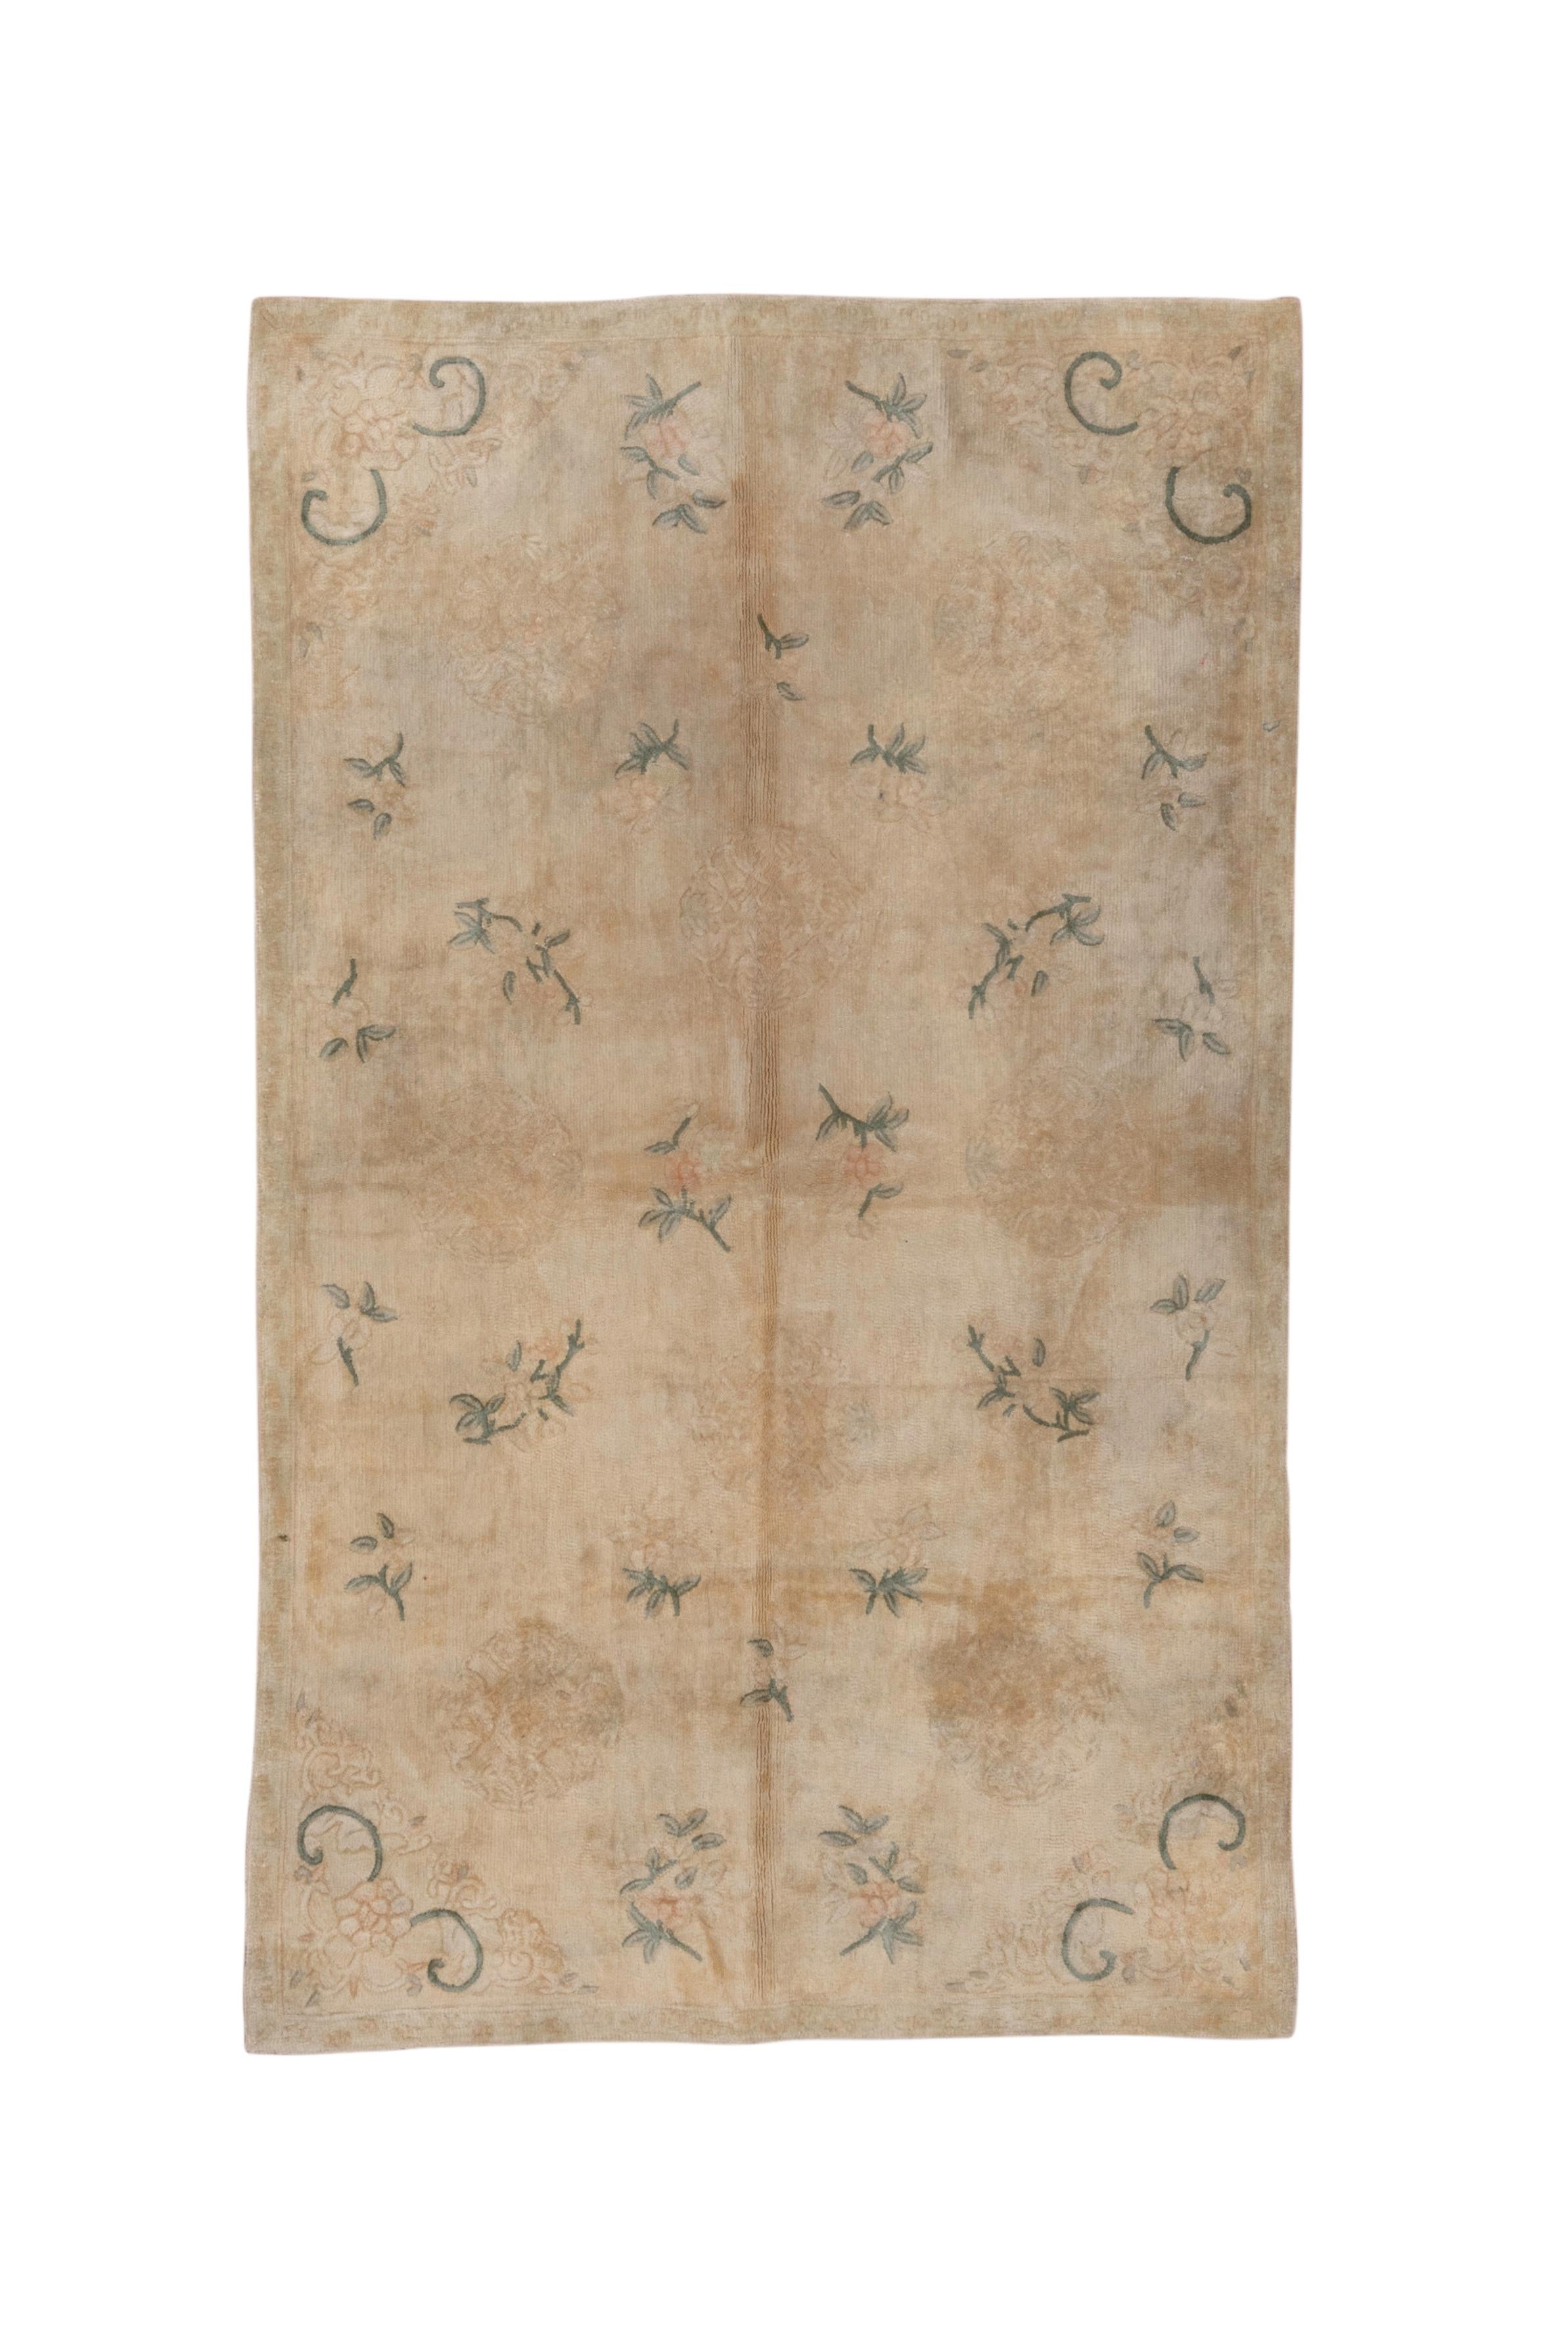 With a pile, but needle worked rather than knotted, this good condition piece on cotton shows a beige field, with a four-way symmetrical dispersed pattern of flower sprays, and rosettes with salient volutes in the corners. Narrow borders are